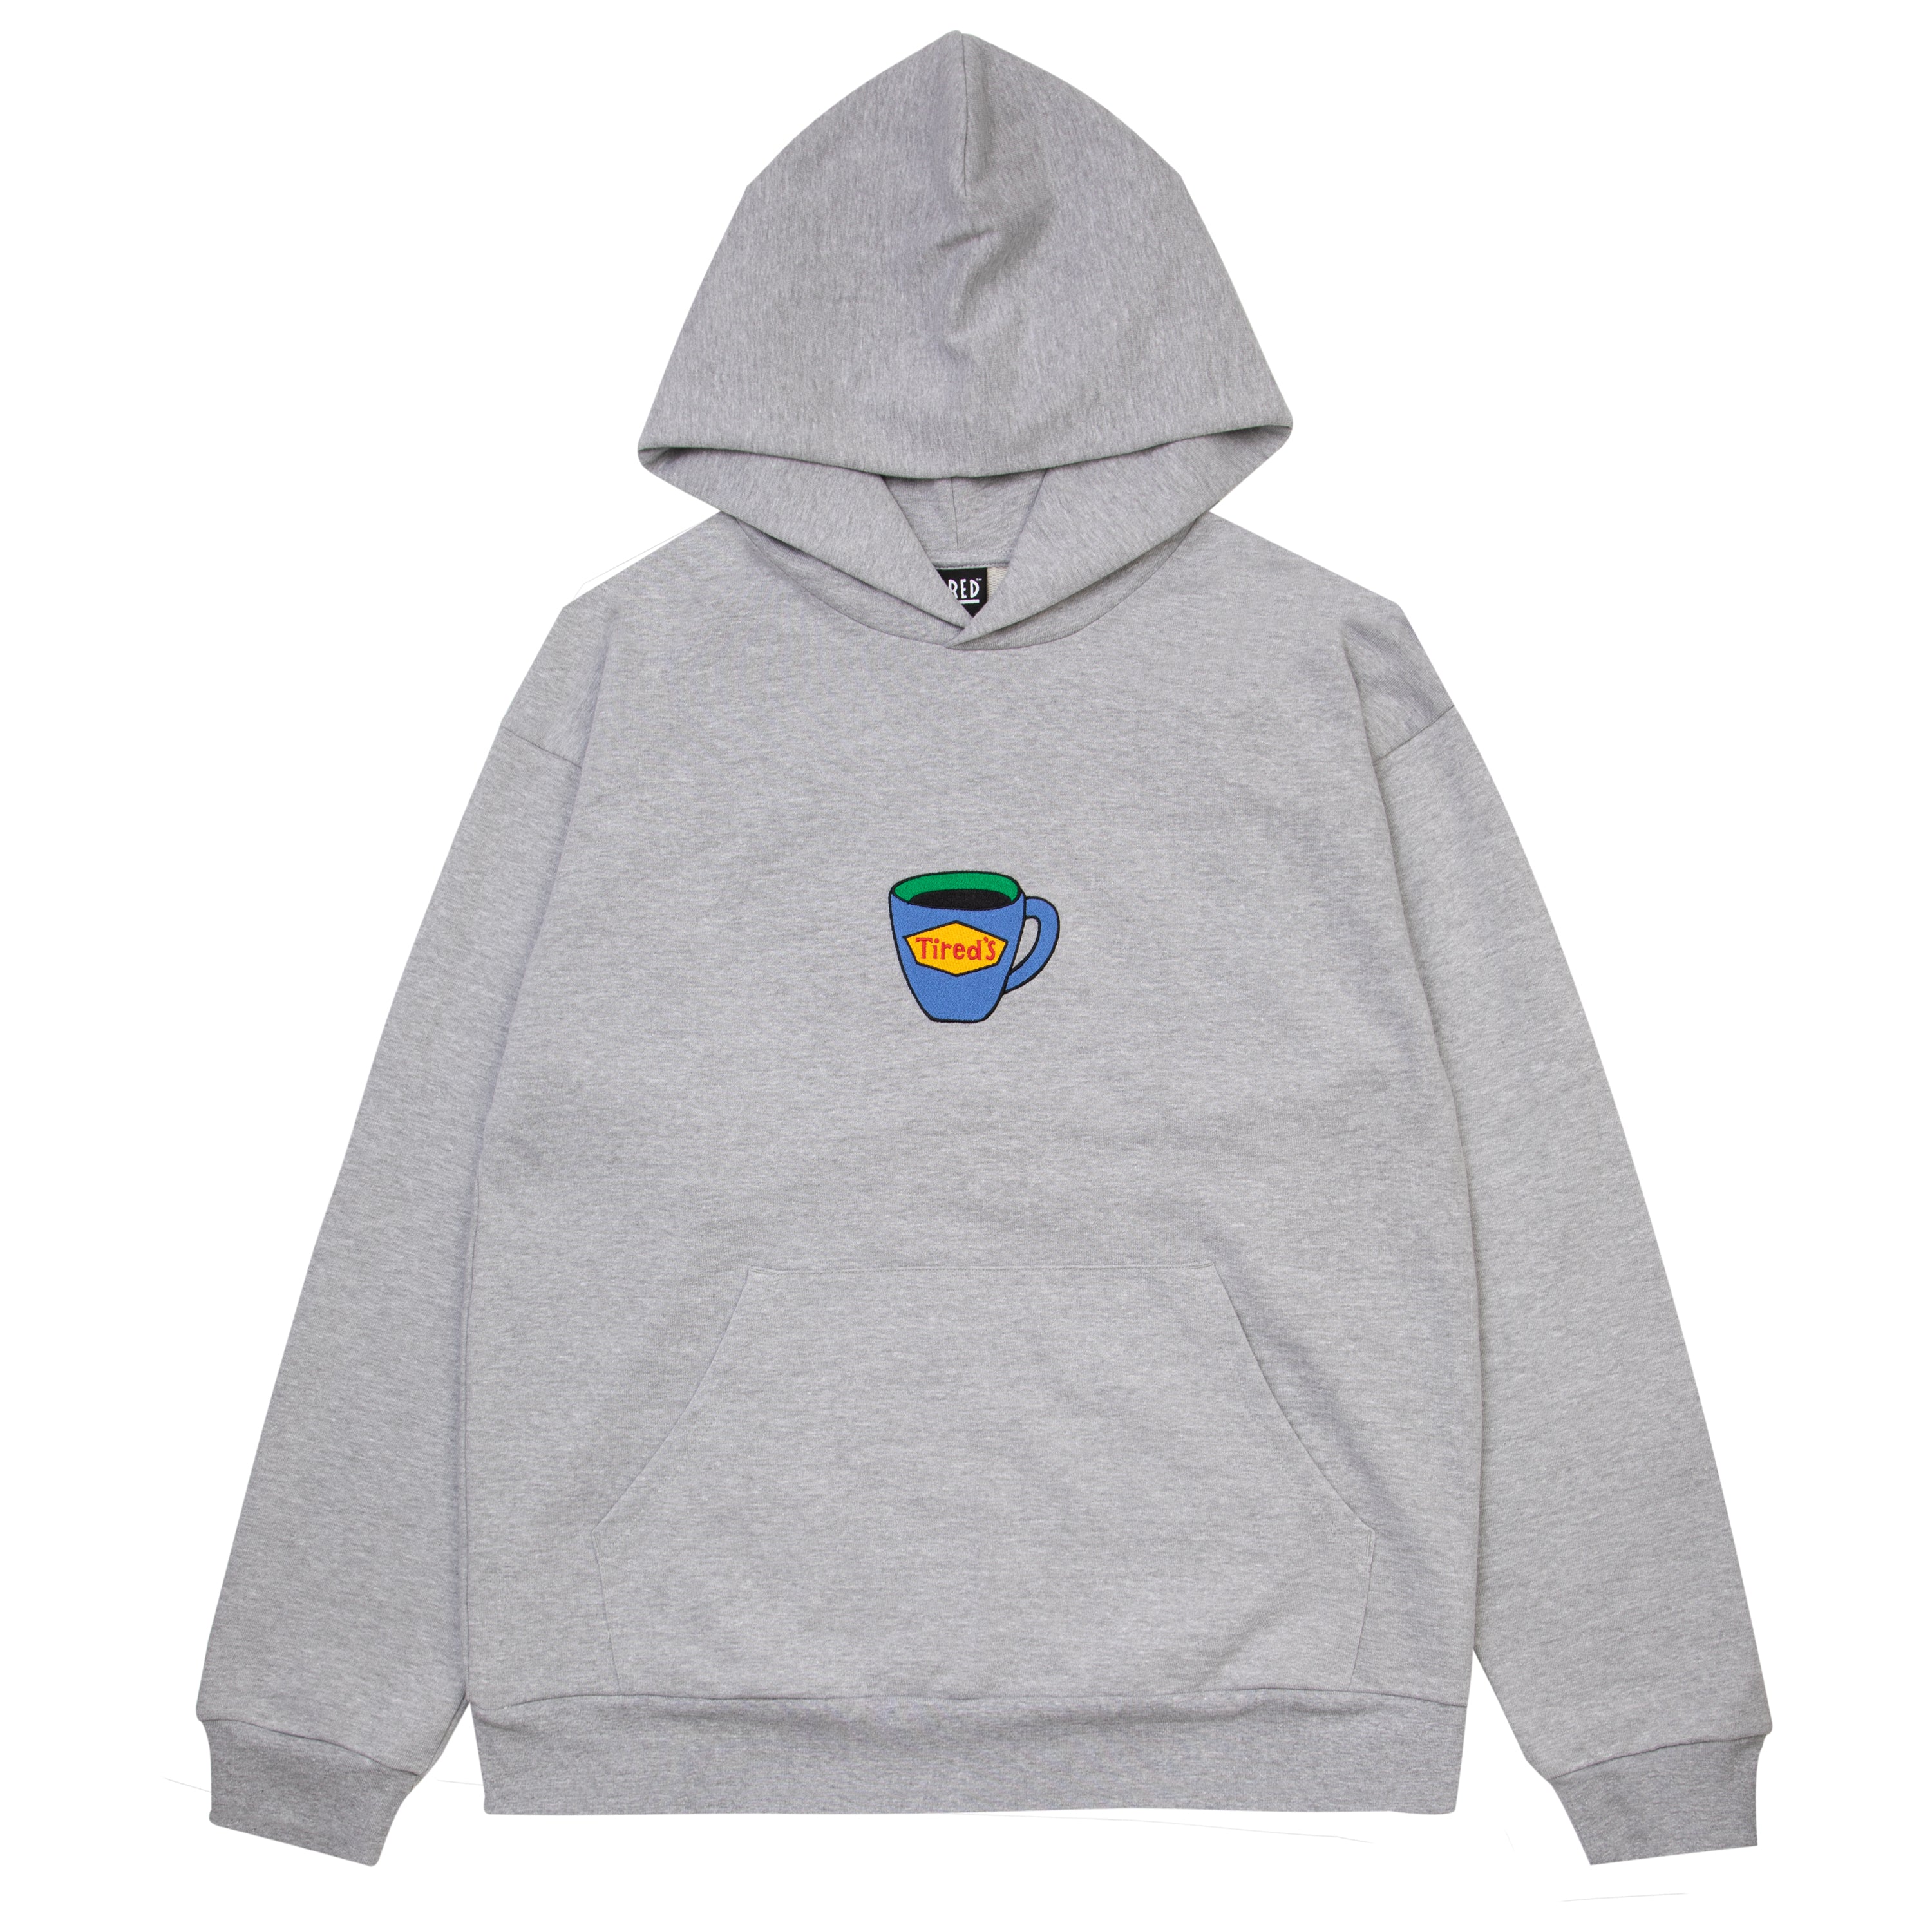 – TIRED\'S skateboards GREY HEATHER HOODIE tired